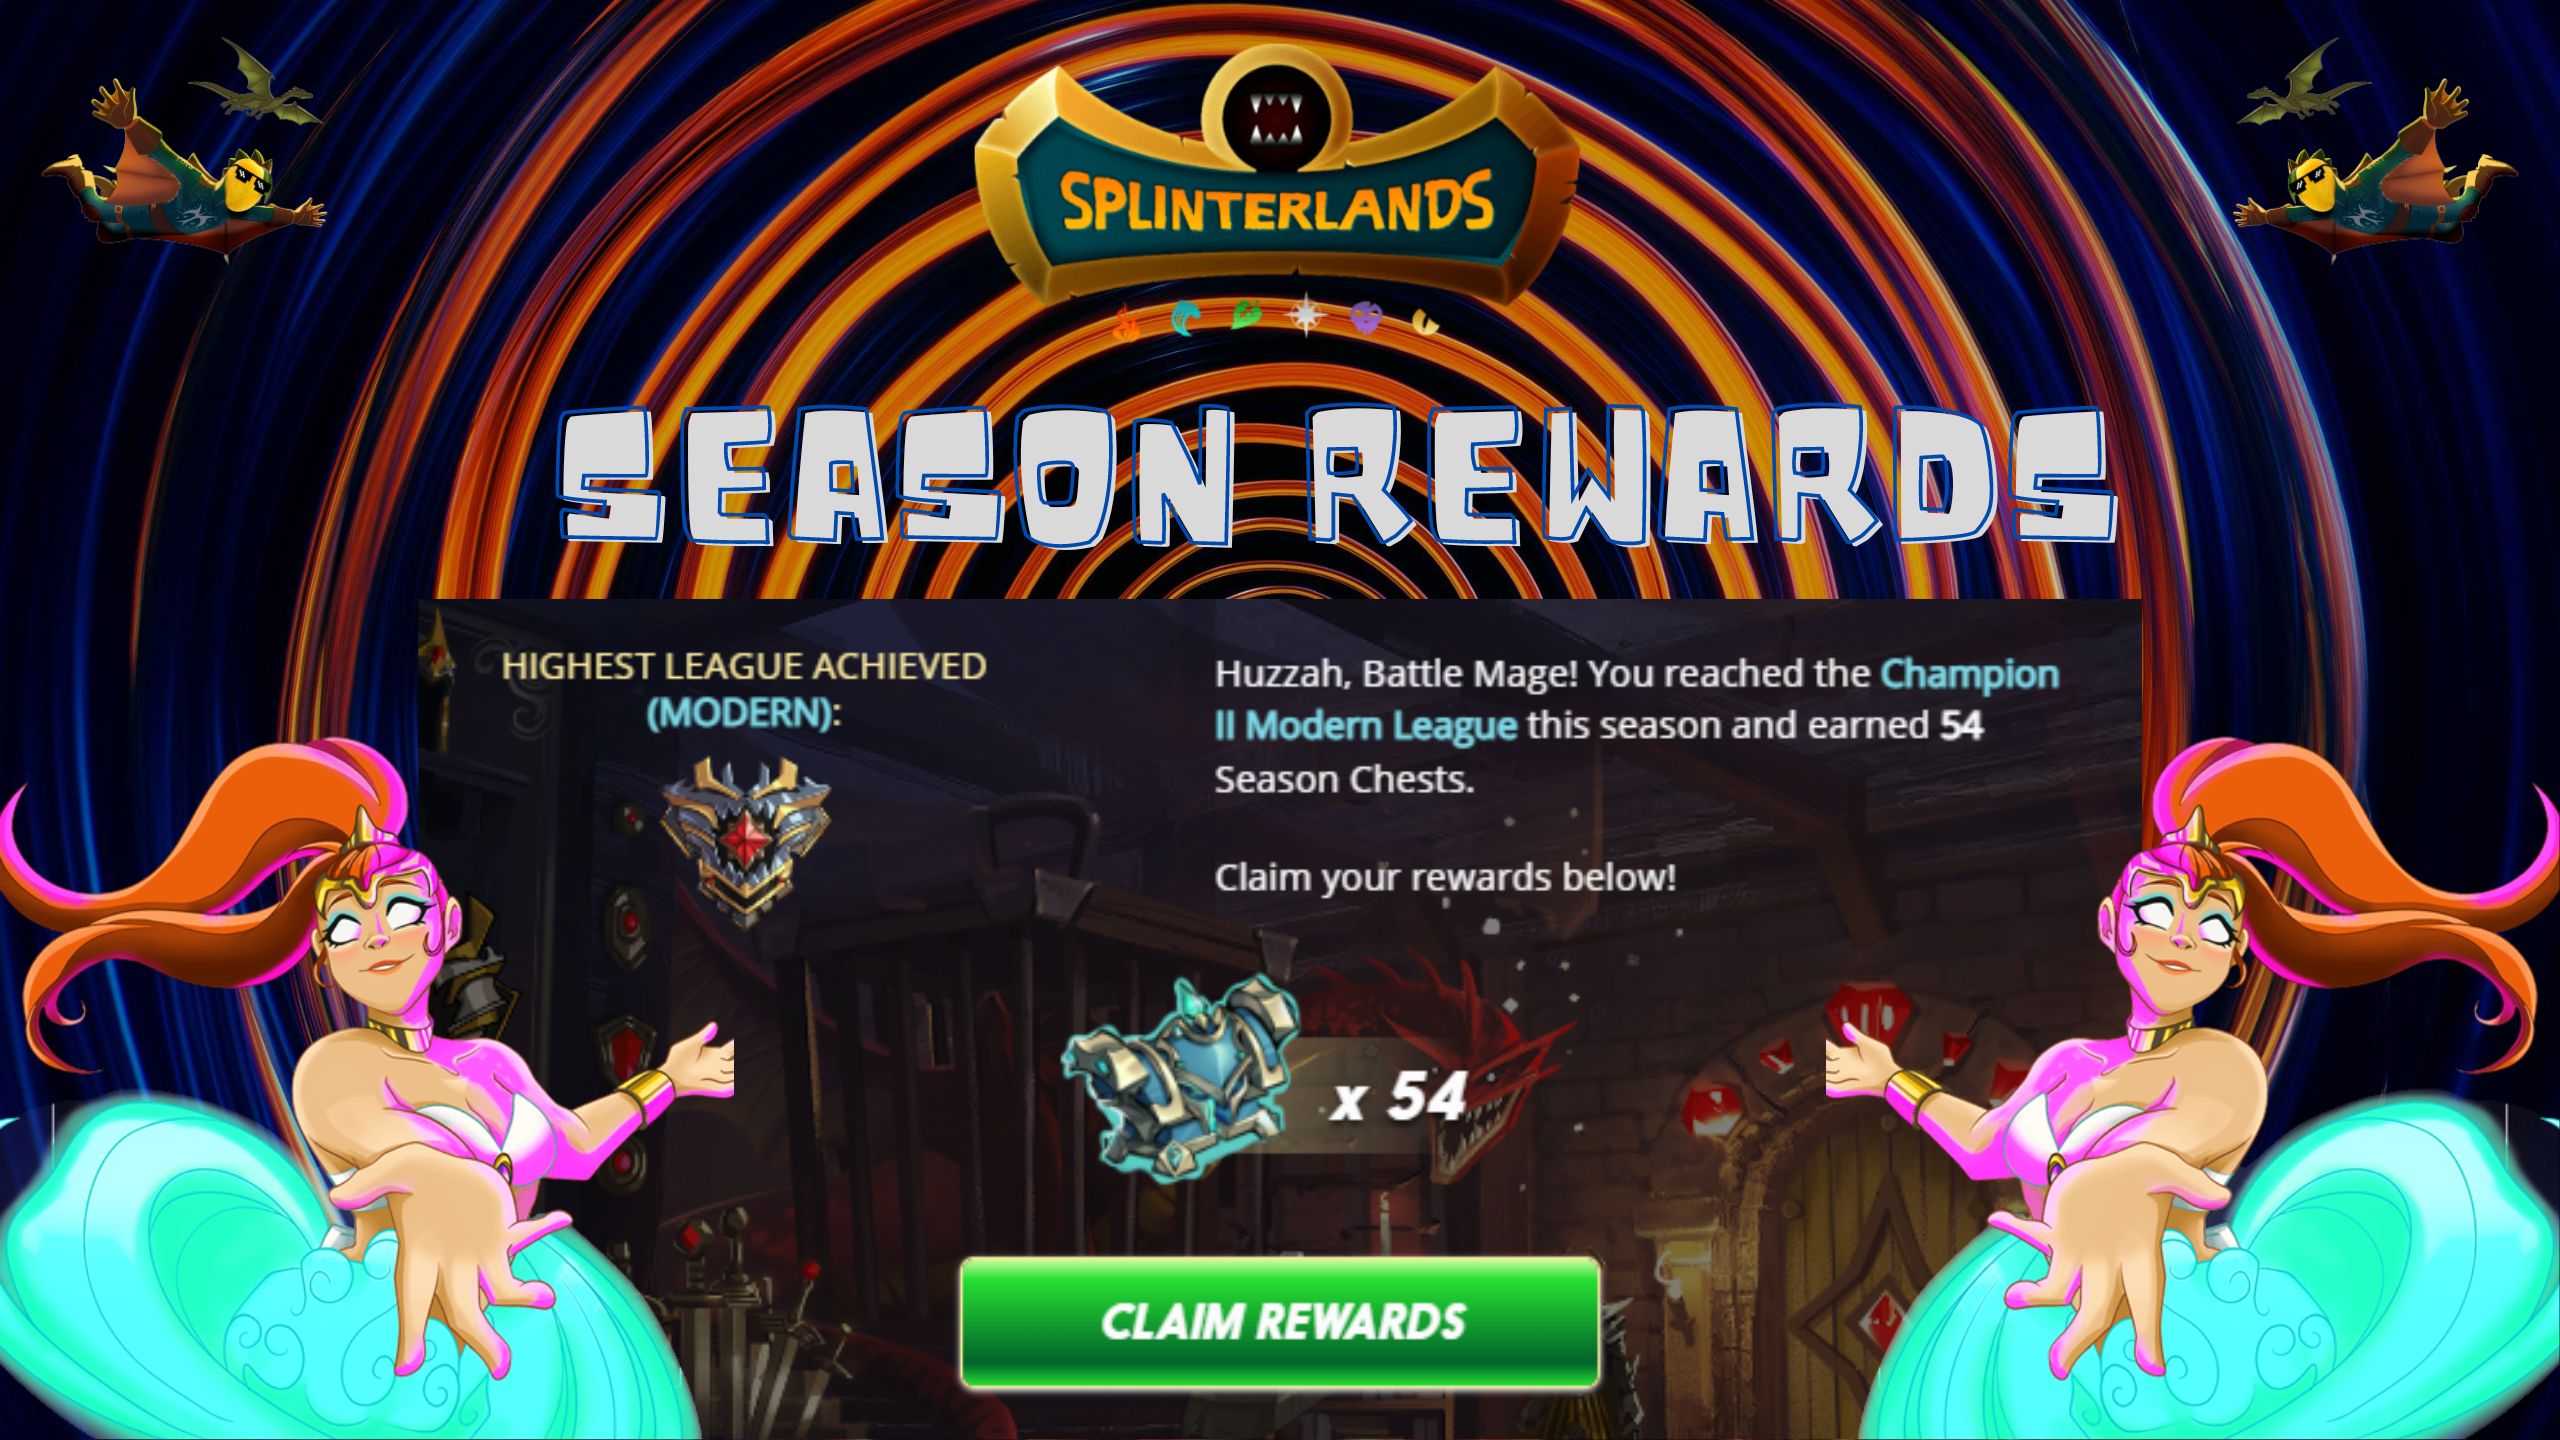 @mango-juice/happy-new-year-to-you-all-or-my-season-rewards-openings-with-54-champ-level-chests